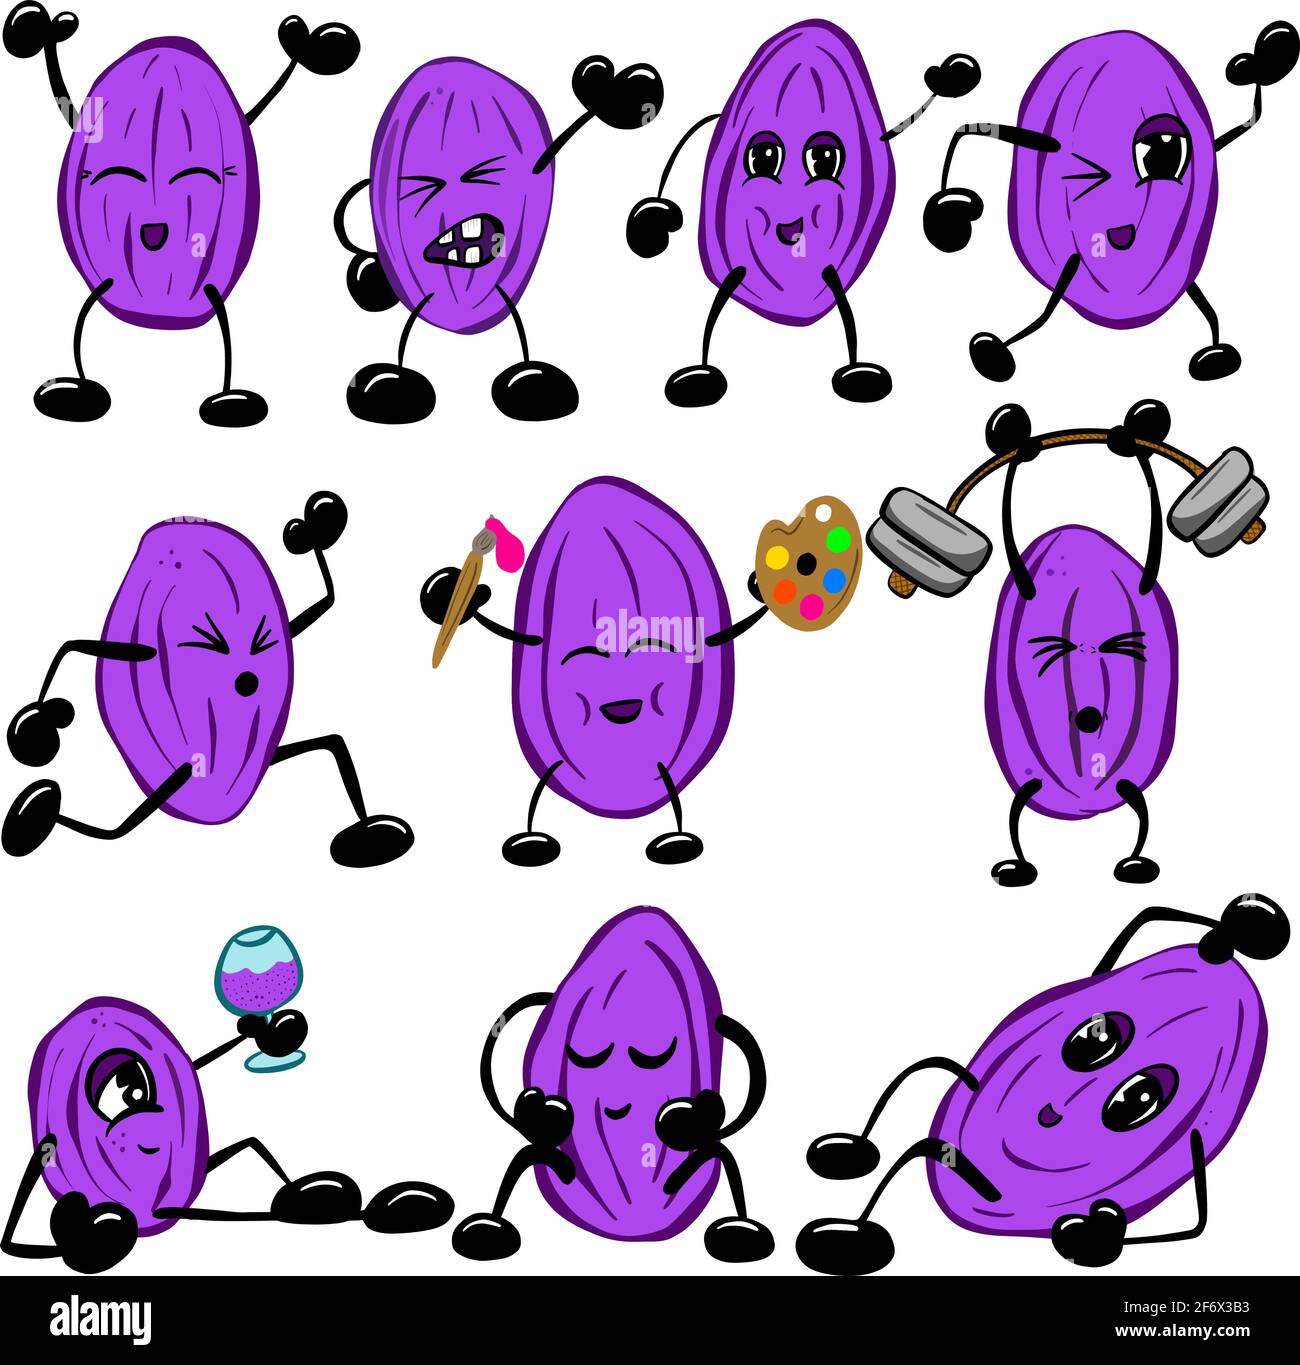 Cartoon Collection of Raisin Berry Characters Drinking Wine Pumping Weights and Being Artistic Stock Vector